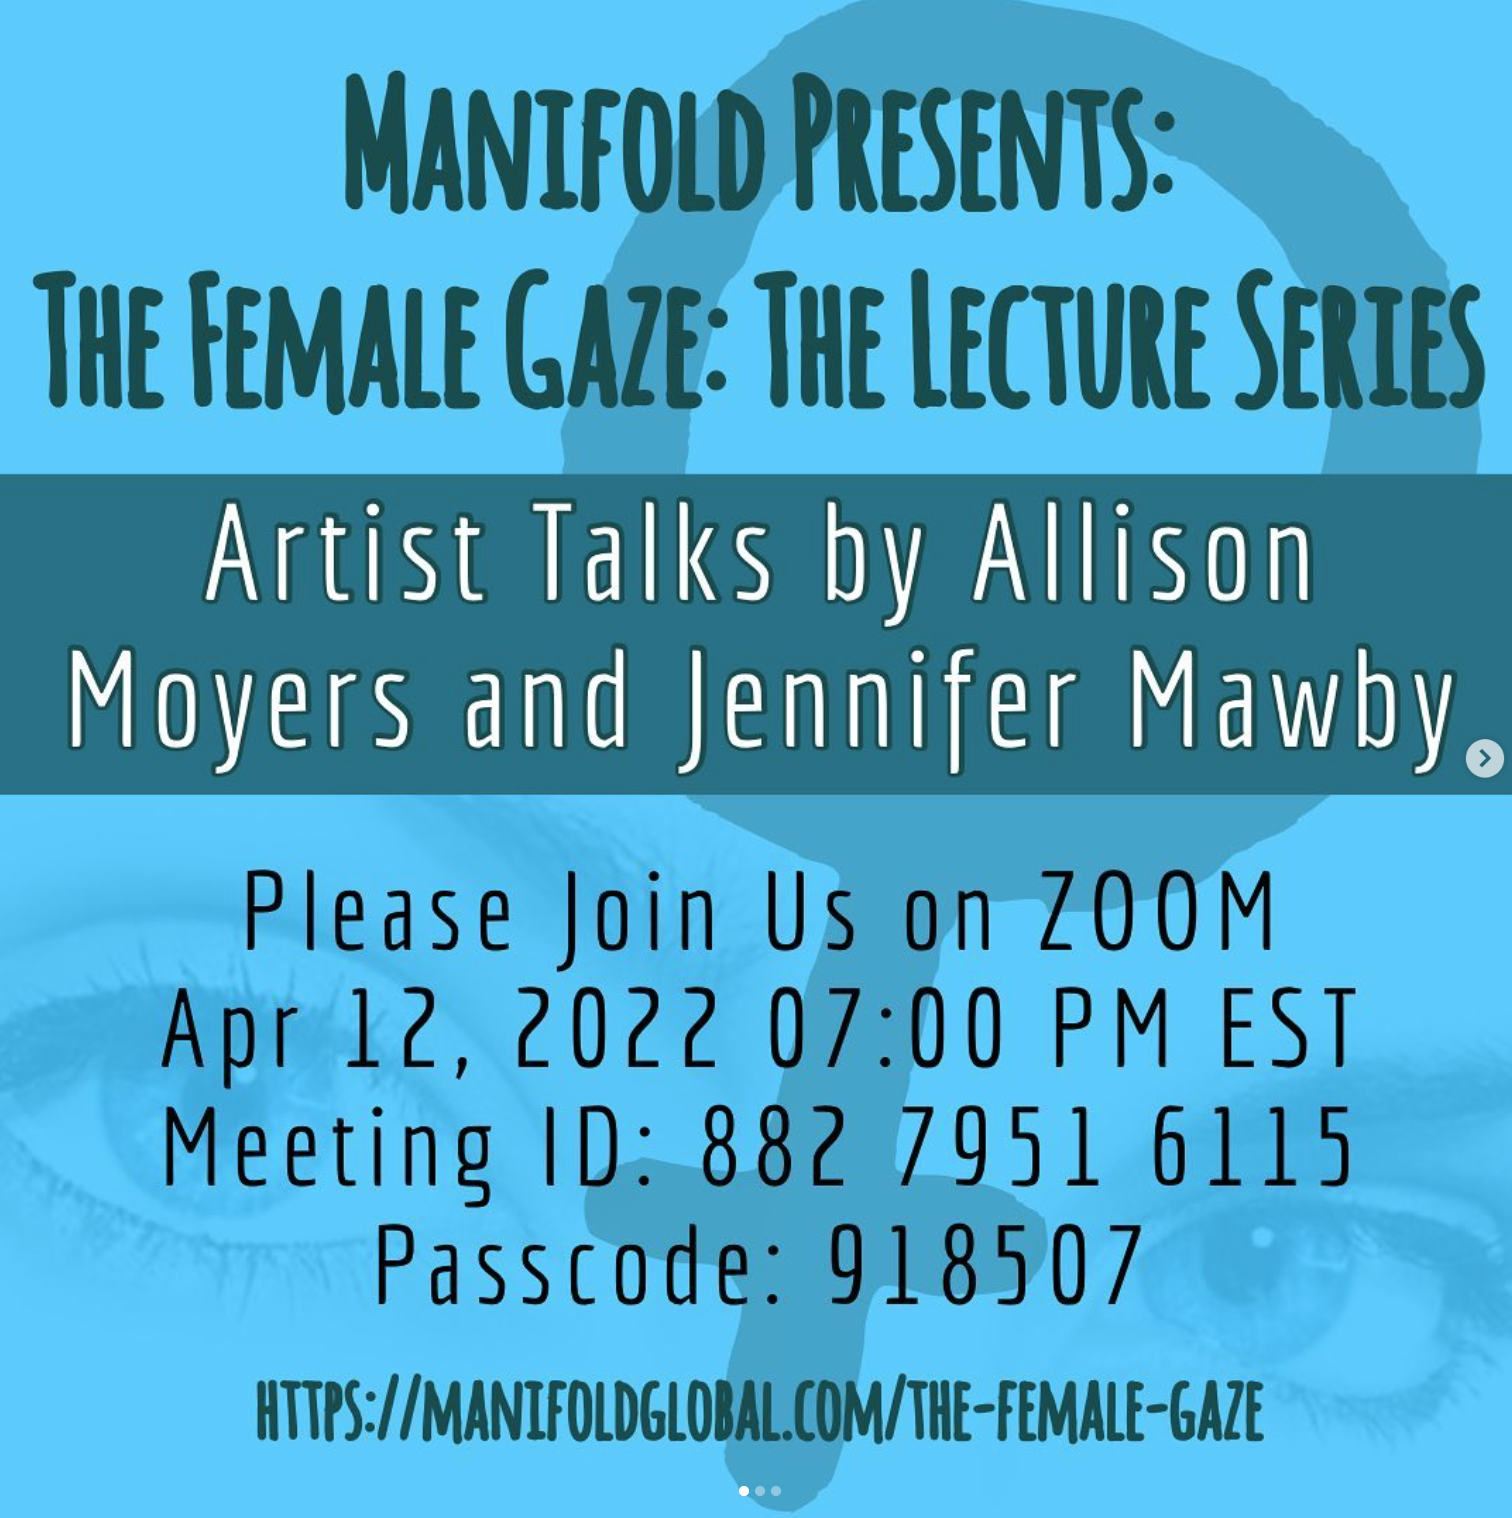 Artist Talk for The Female Gaze Exhibition at Manifold Global